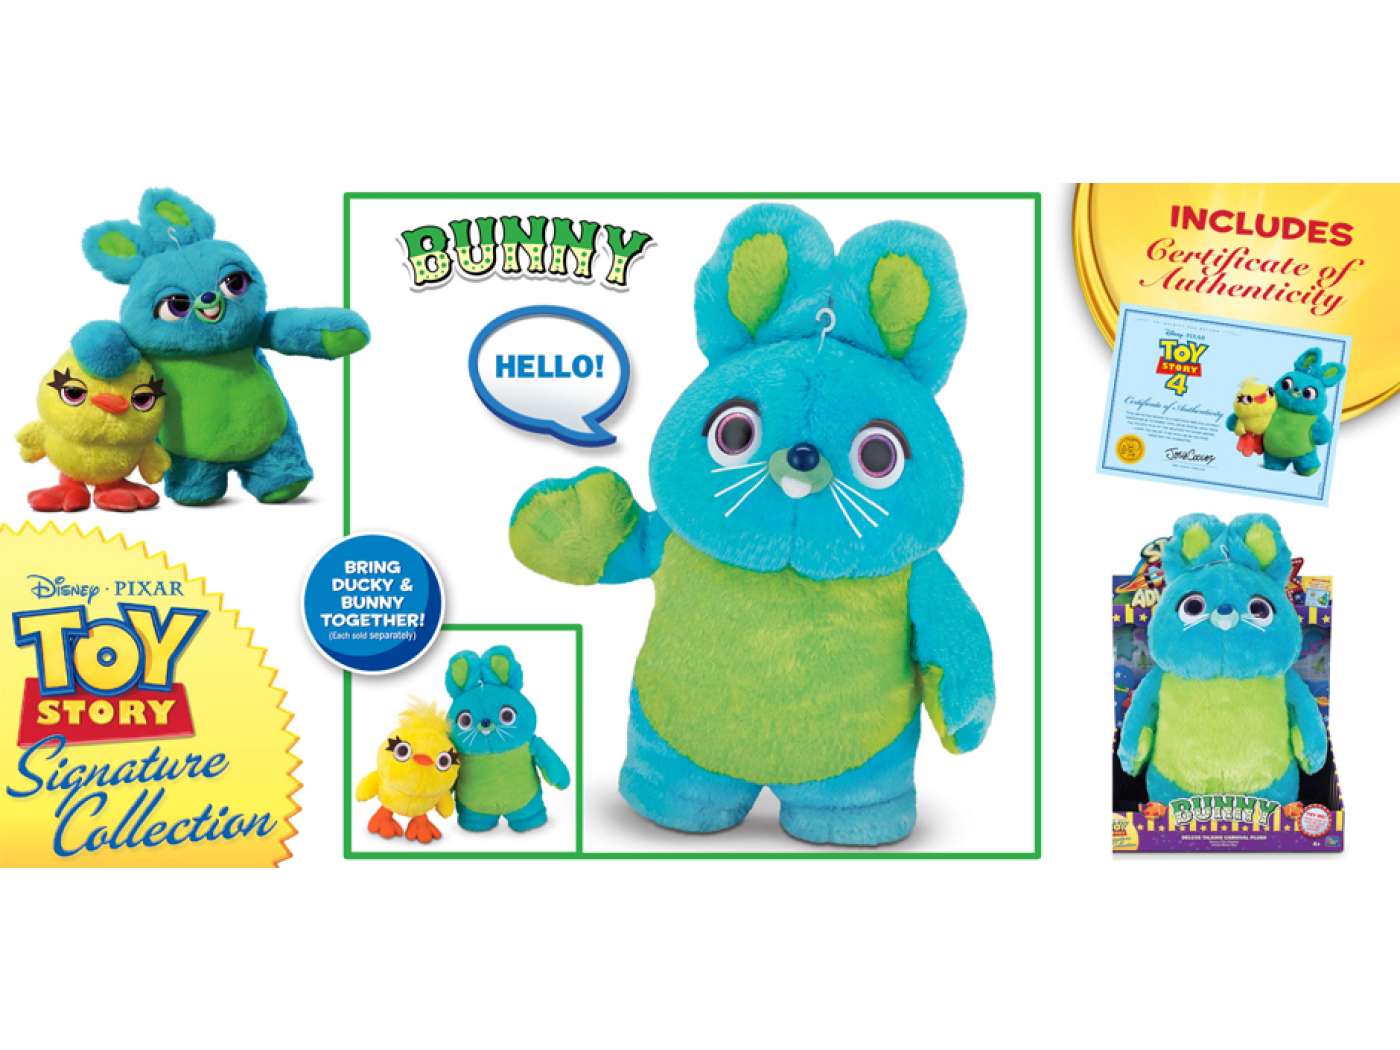 Noroeste papel entregar Signature Collection: Toy Story - Bunny Deluxe Talking Plush | MAINAN JEBO